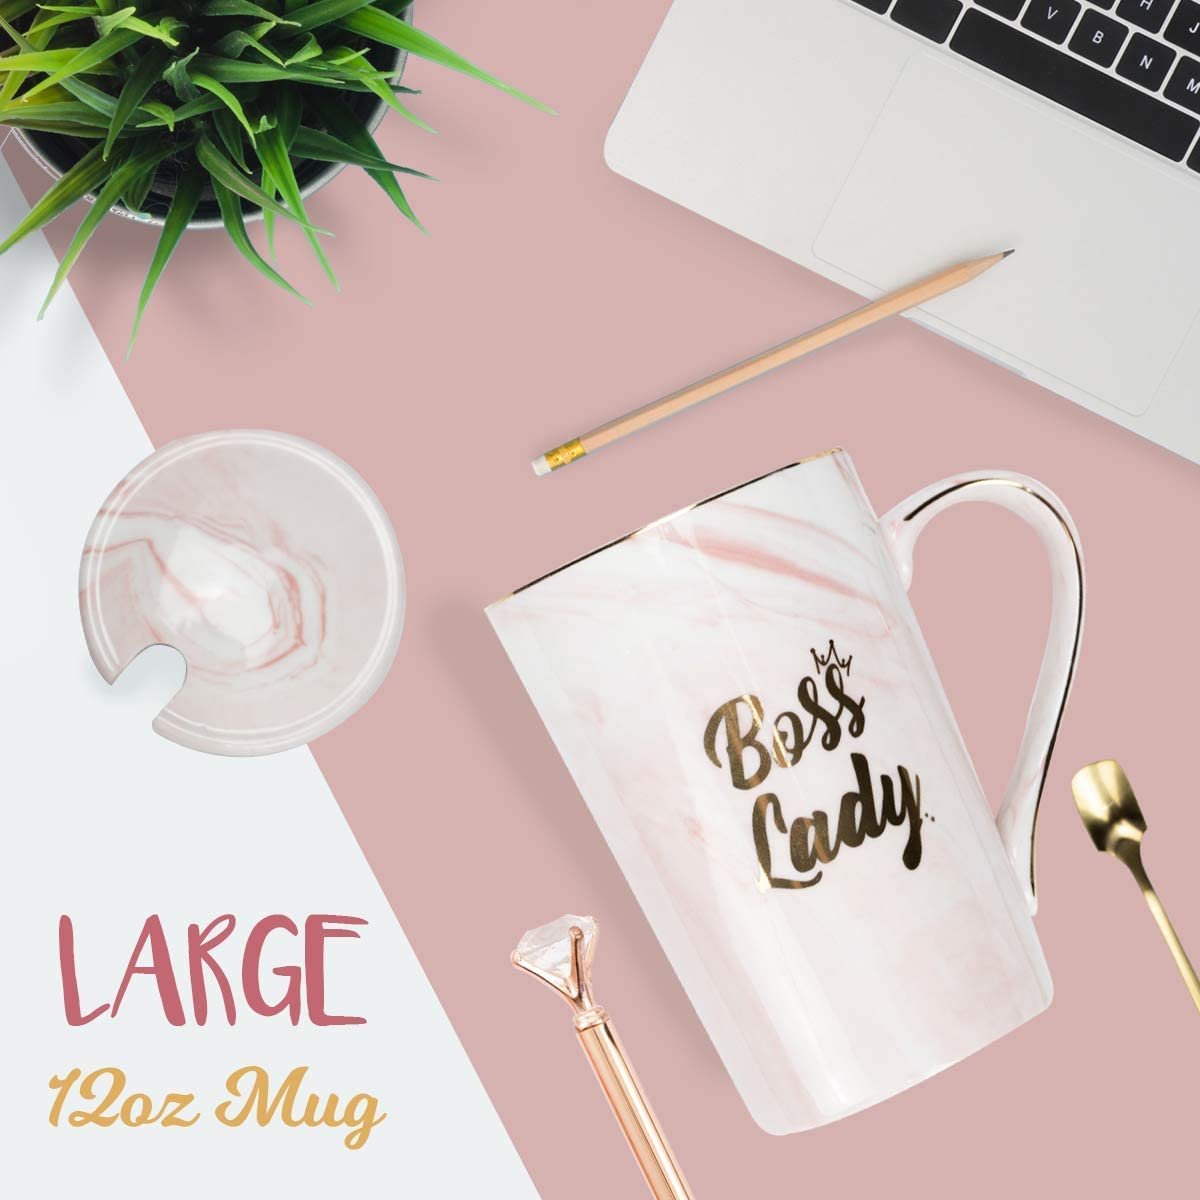 Coffee Mugs For Women, Boss Lady Gifts For Women, Birthday Gifts For Mom, Retirement Gifts For Women, Office Decor for Women Desk, Rose Gold Decor, Funny Gifts For Women, Unique Gifts For Women - image 4 of 6